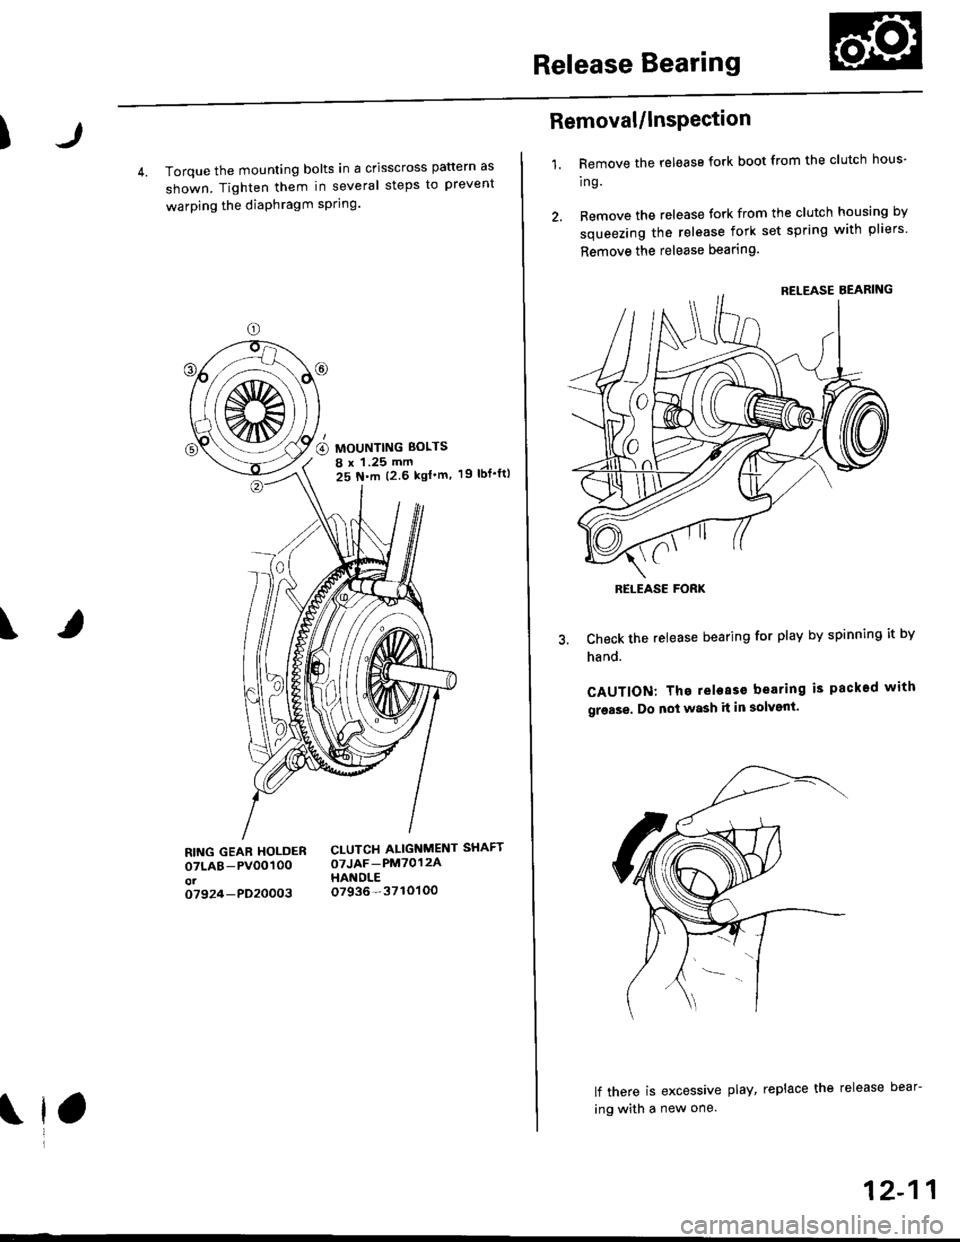 HONDA CIVIC 1996 6.G Service Manual Release Bearing
)
4. Torque the mounting bolts in a crisscross pattern as
shown. Tighten them in several steps to prevent
warping the diaPhragm sPring.
19 rbf.ft)
\
RING GEAR HOLDERoTLAB-PV00100ot0792